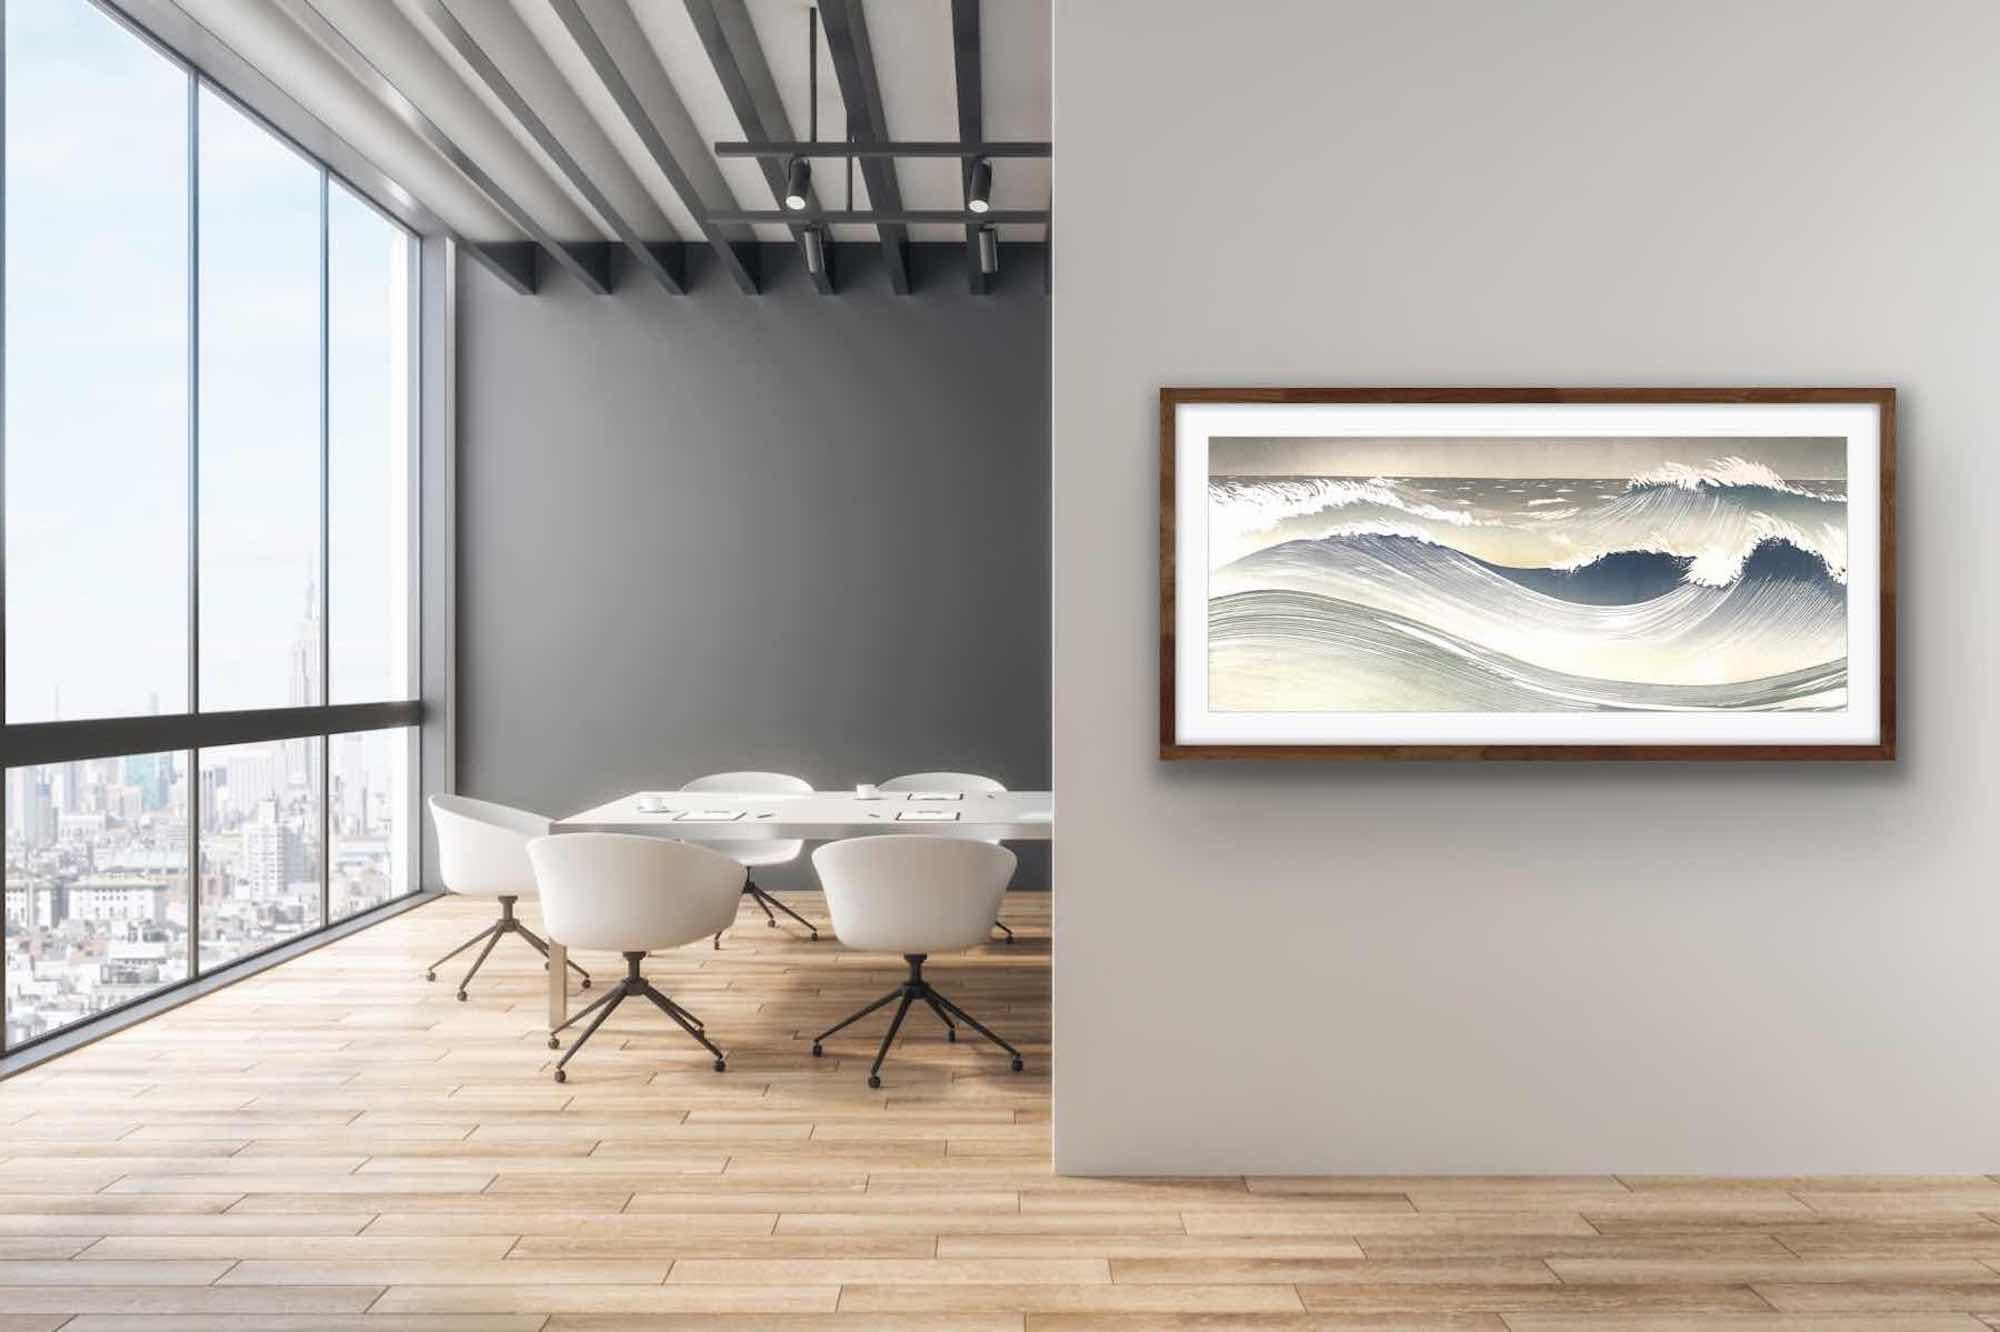 Tide Race by Artist Rod Nelson is a limited edition print. The scene captures the violently beautiful way in which waves crash.
Rod Nelson is a printmaker whose works are available online and in our gallery at Wychwood Art. Rod Nelson had worked for